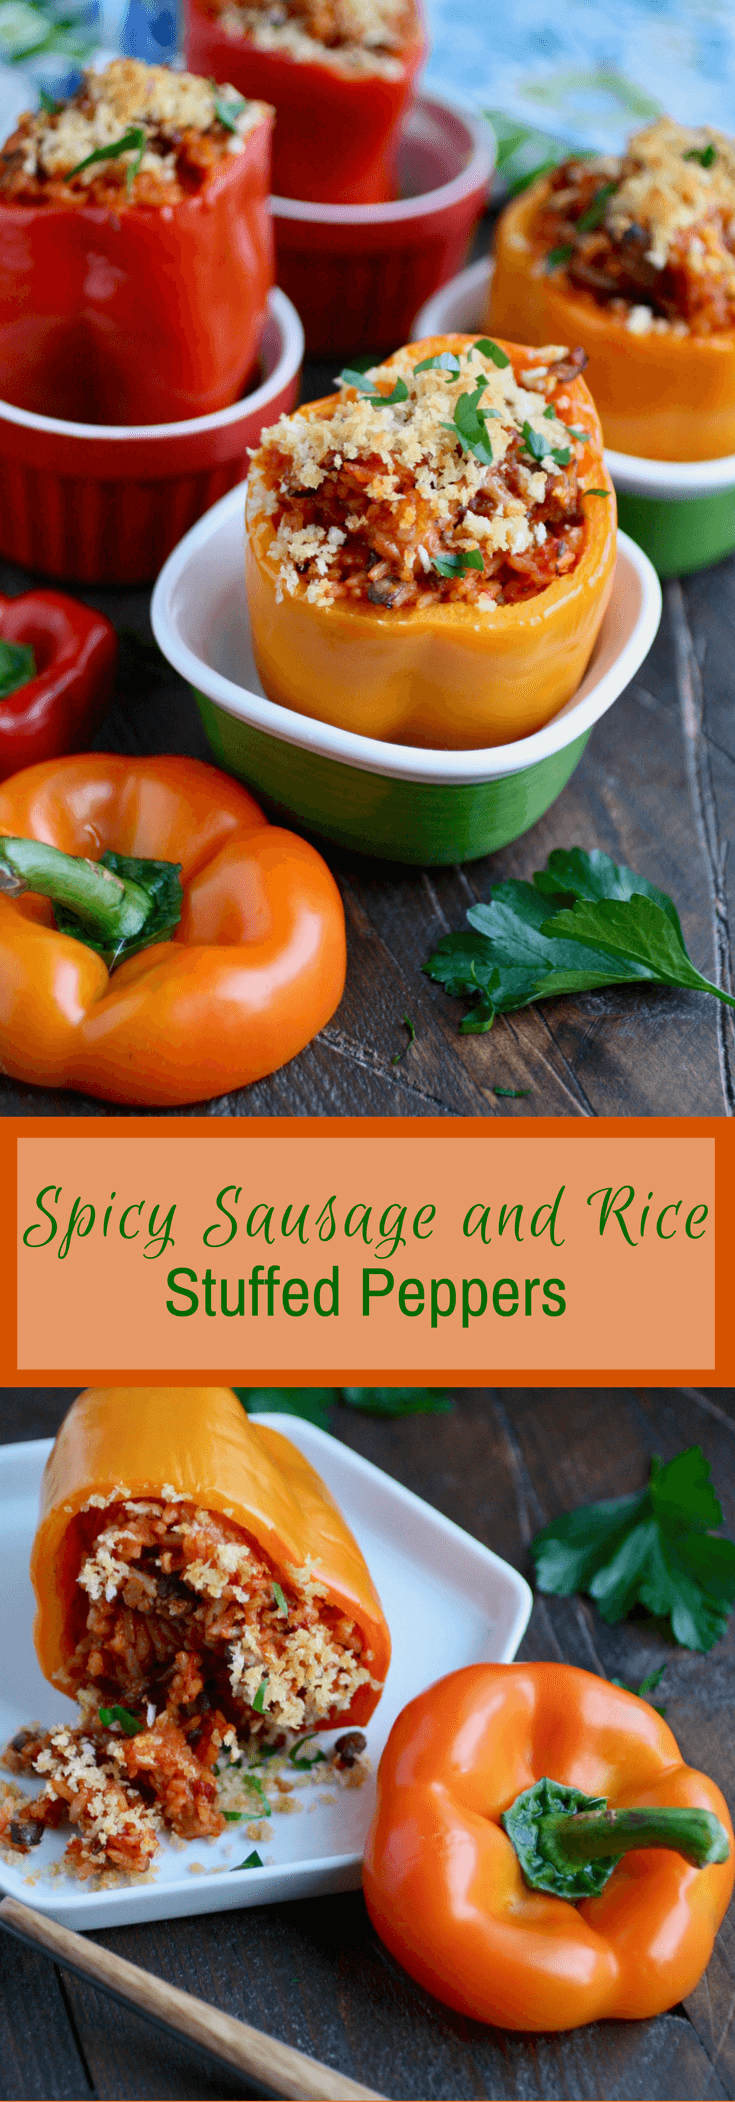 Spicy Sausage and Rice Stuffed Peppers makes a great meal -- so comforting and filling!